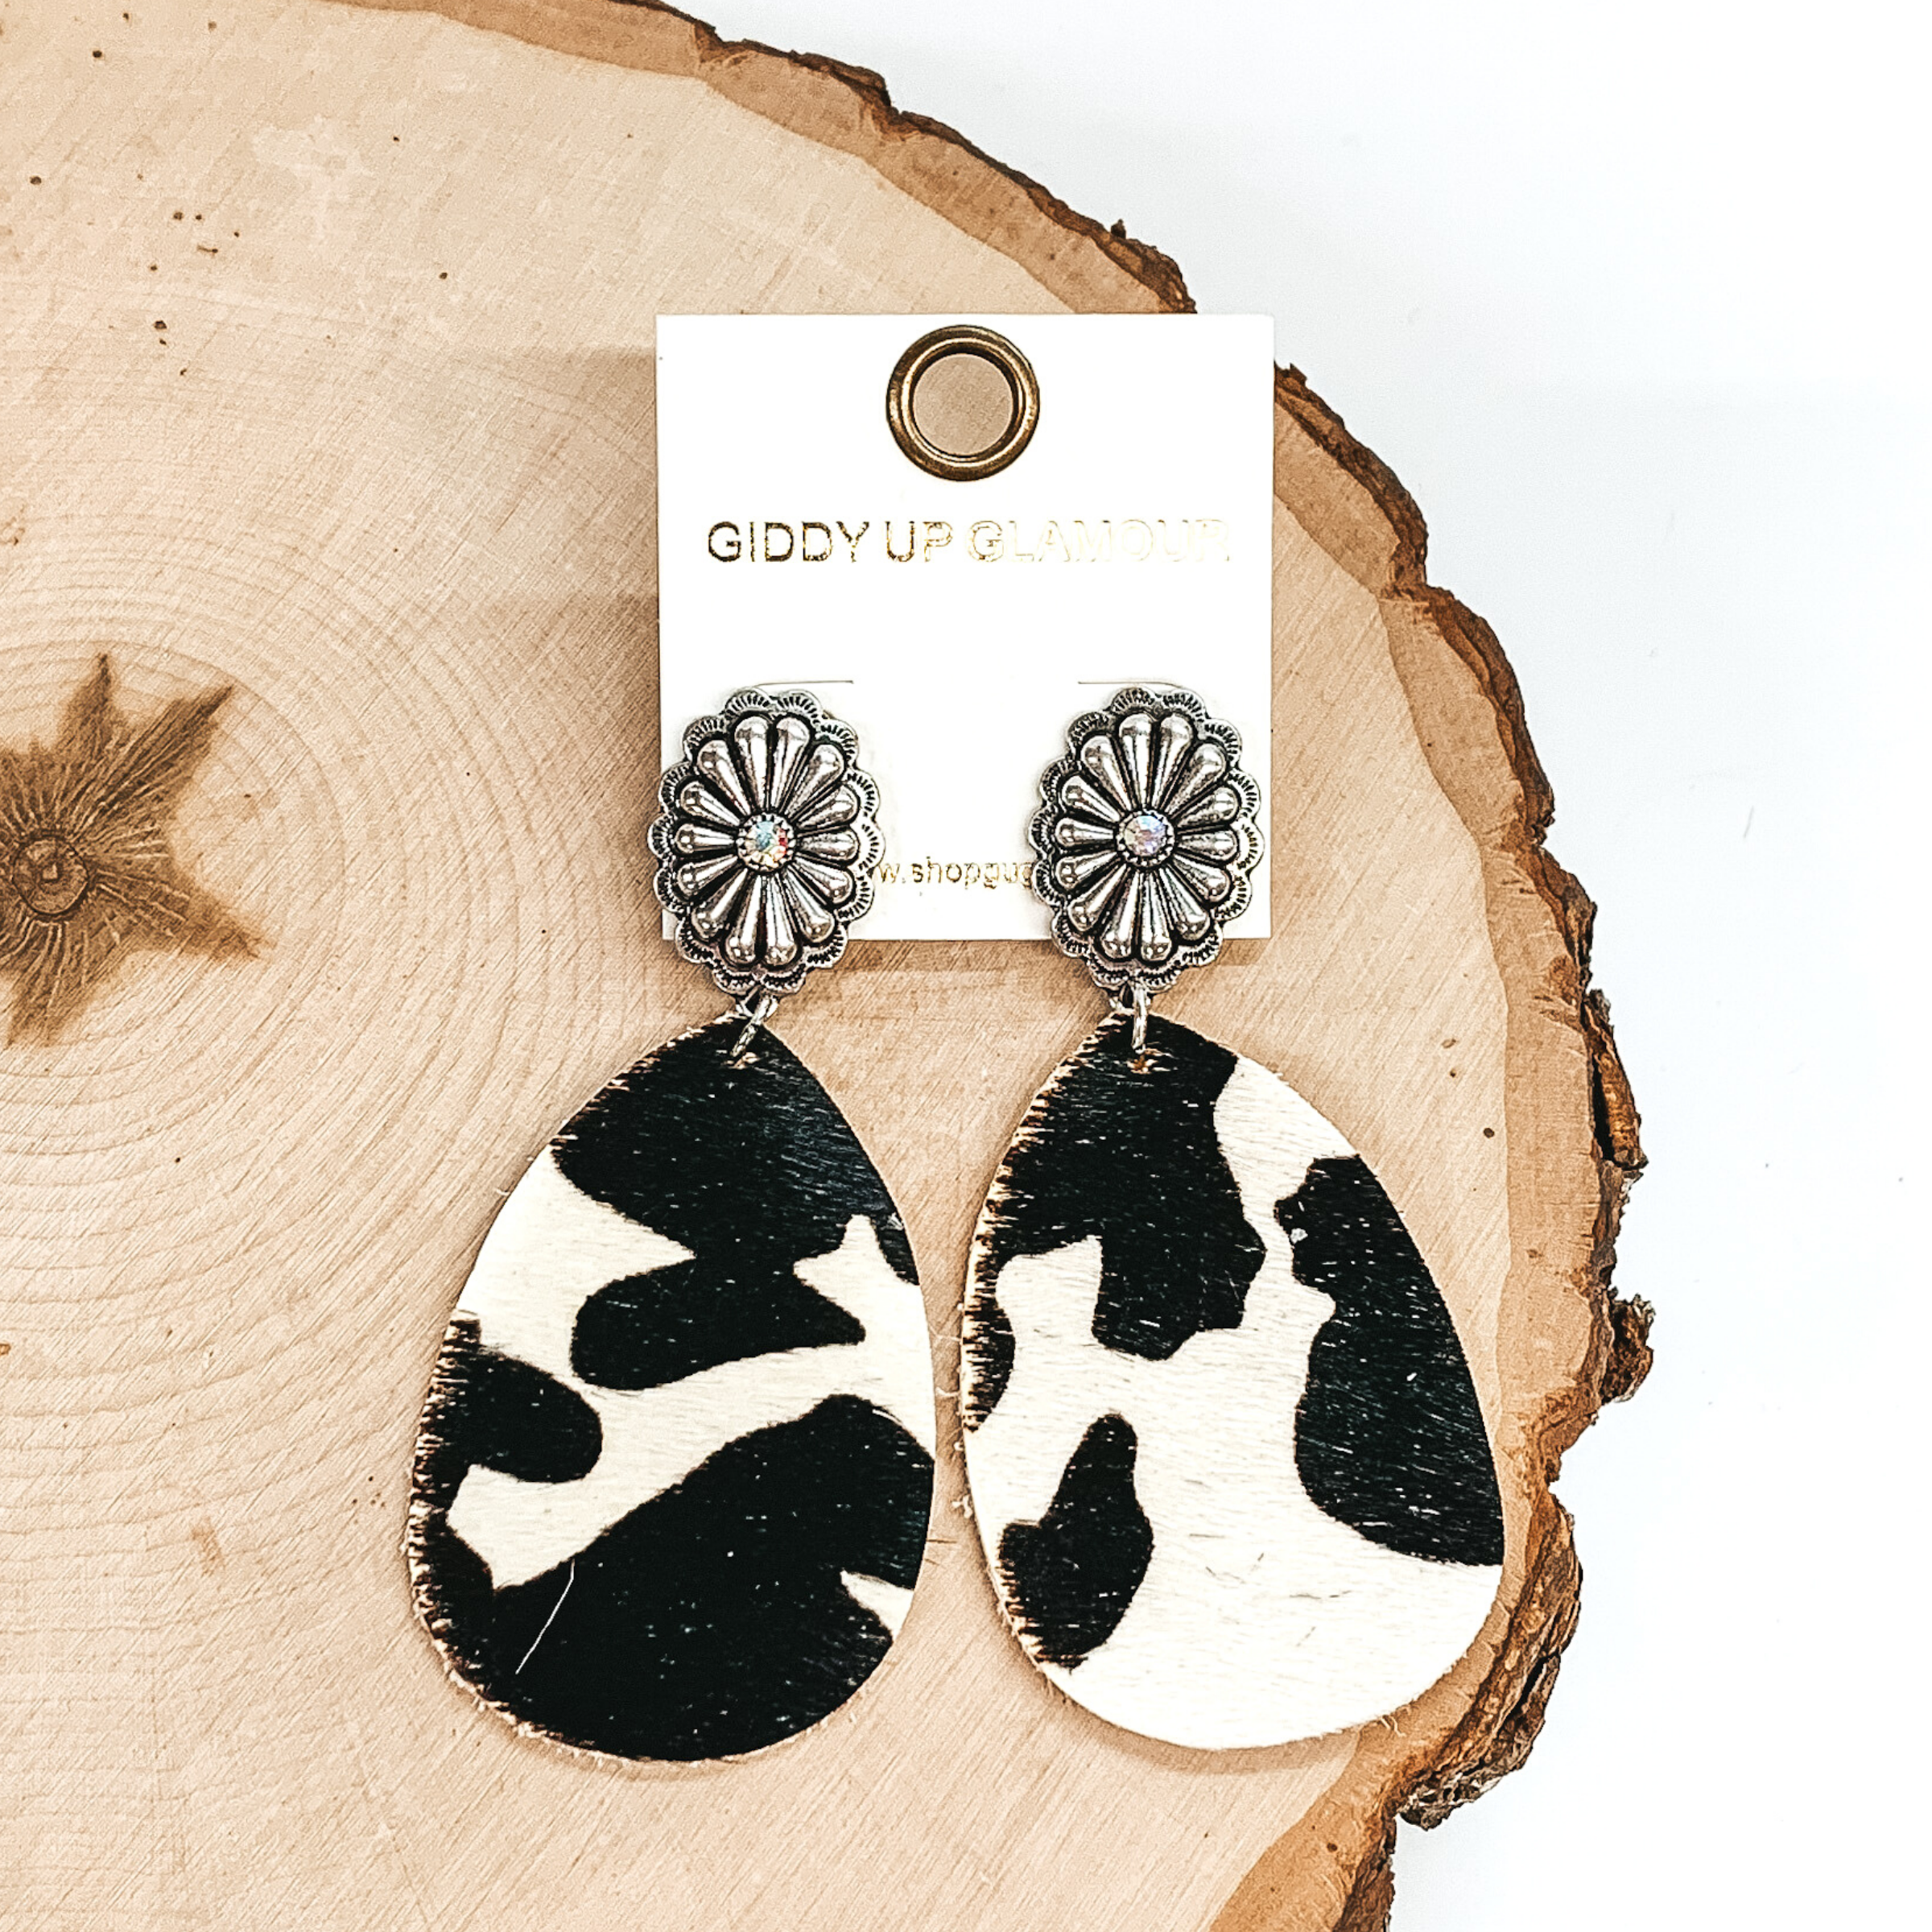 These earrings have small, oval, silver concho studs with a hanging teardrop pendant. This pendant has a white and black cow hide print. These earrings are pictured laying on a piece of wood on a white background. 